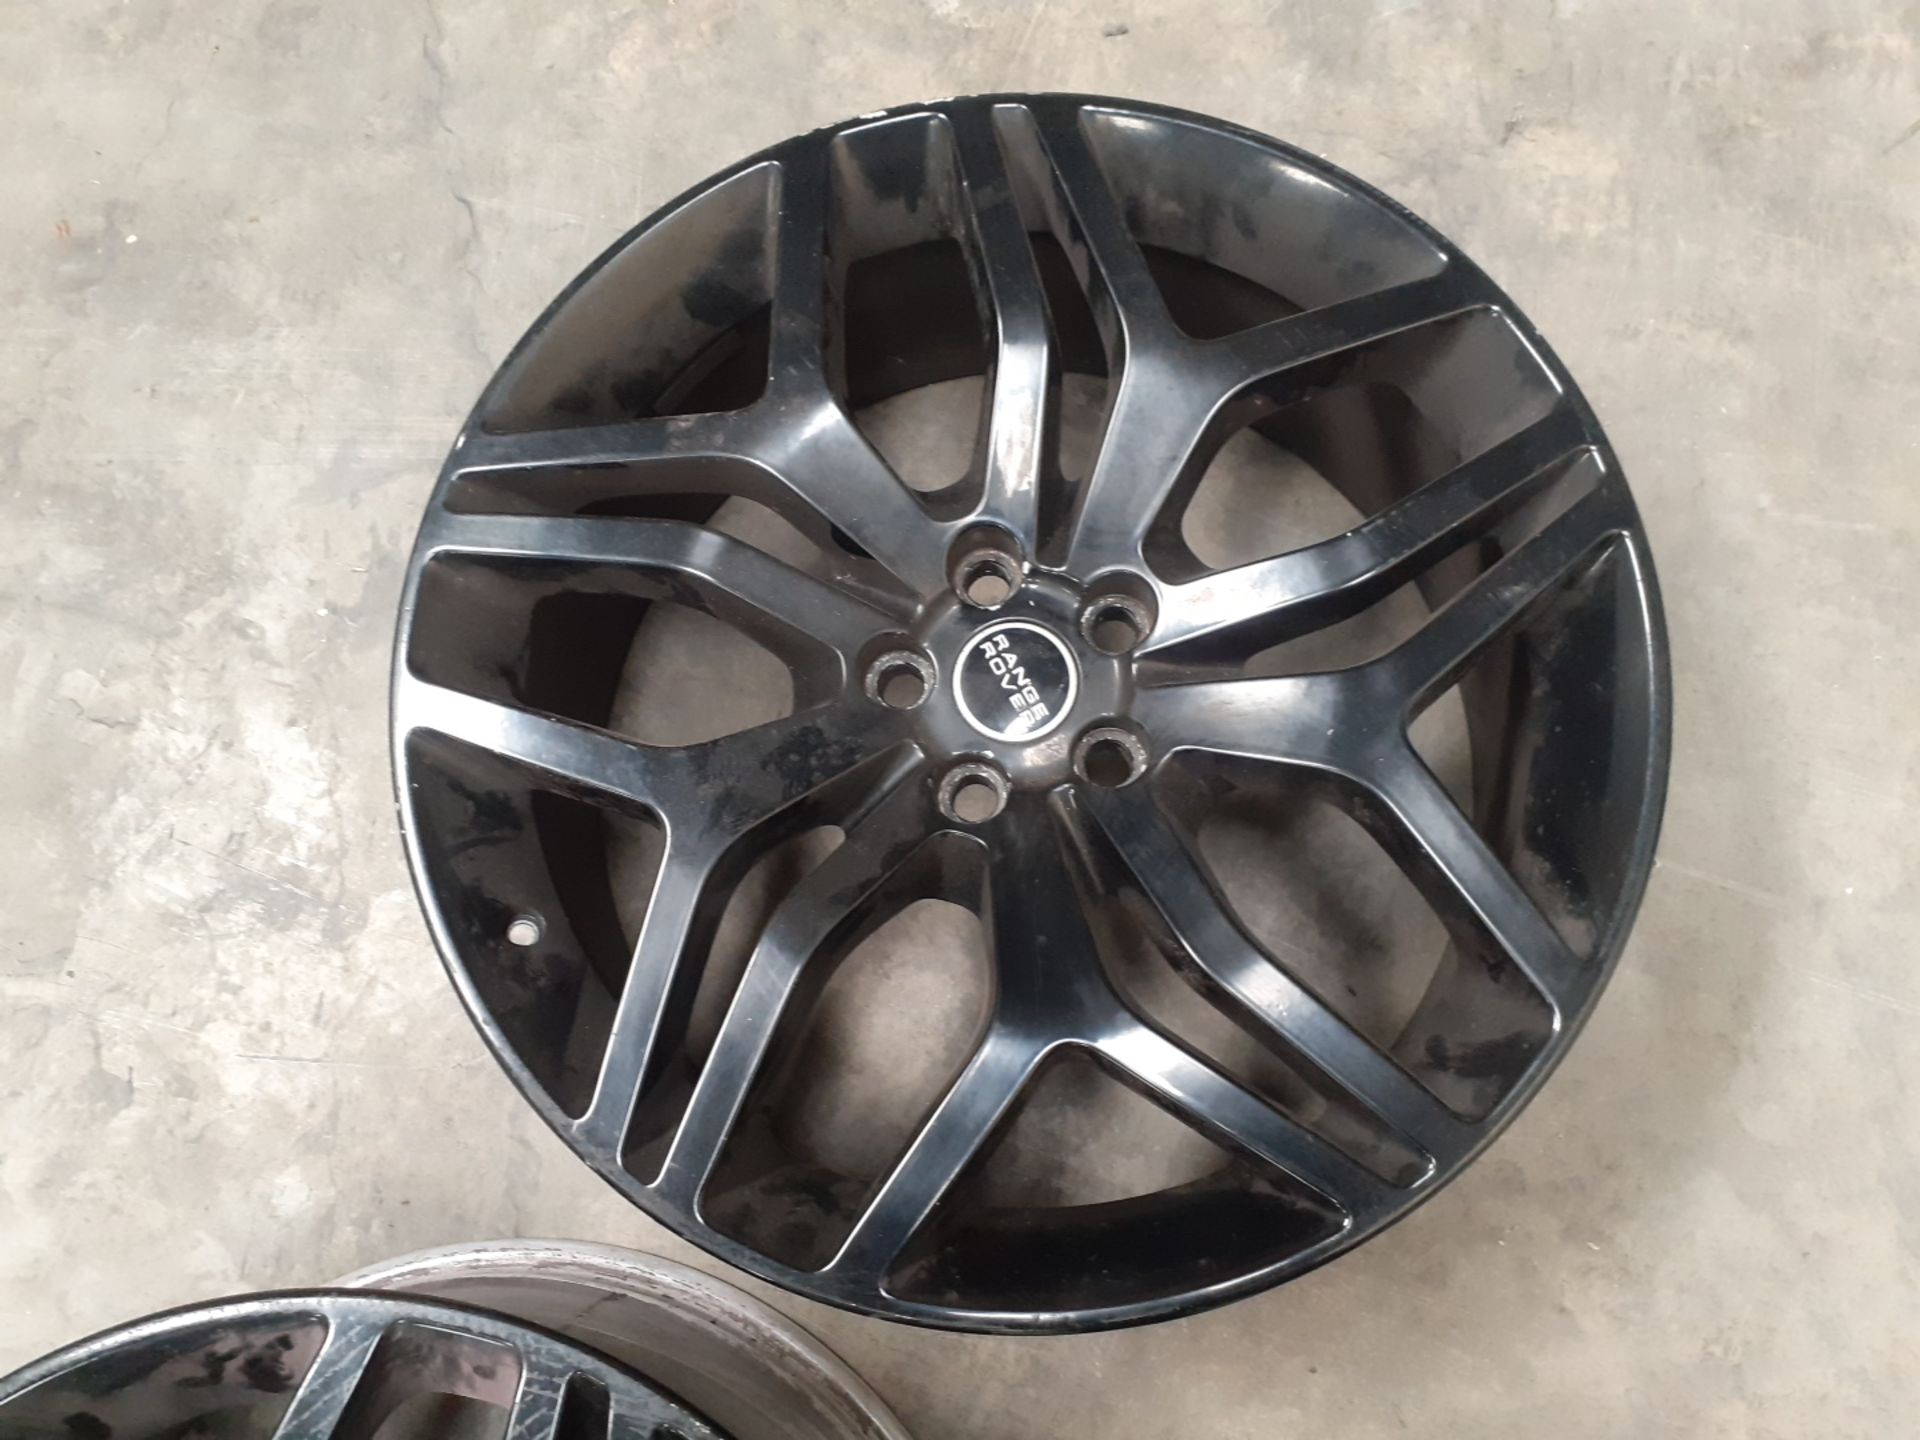 JOB LOT OF 30 SETS OF ALLOY WHEELS WITH TYRES, LAND ROVER RANGE ROVER, OVER £31K RRP *NO VAT* - Image 17 of 17